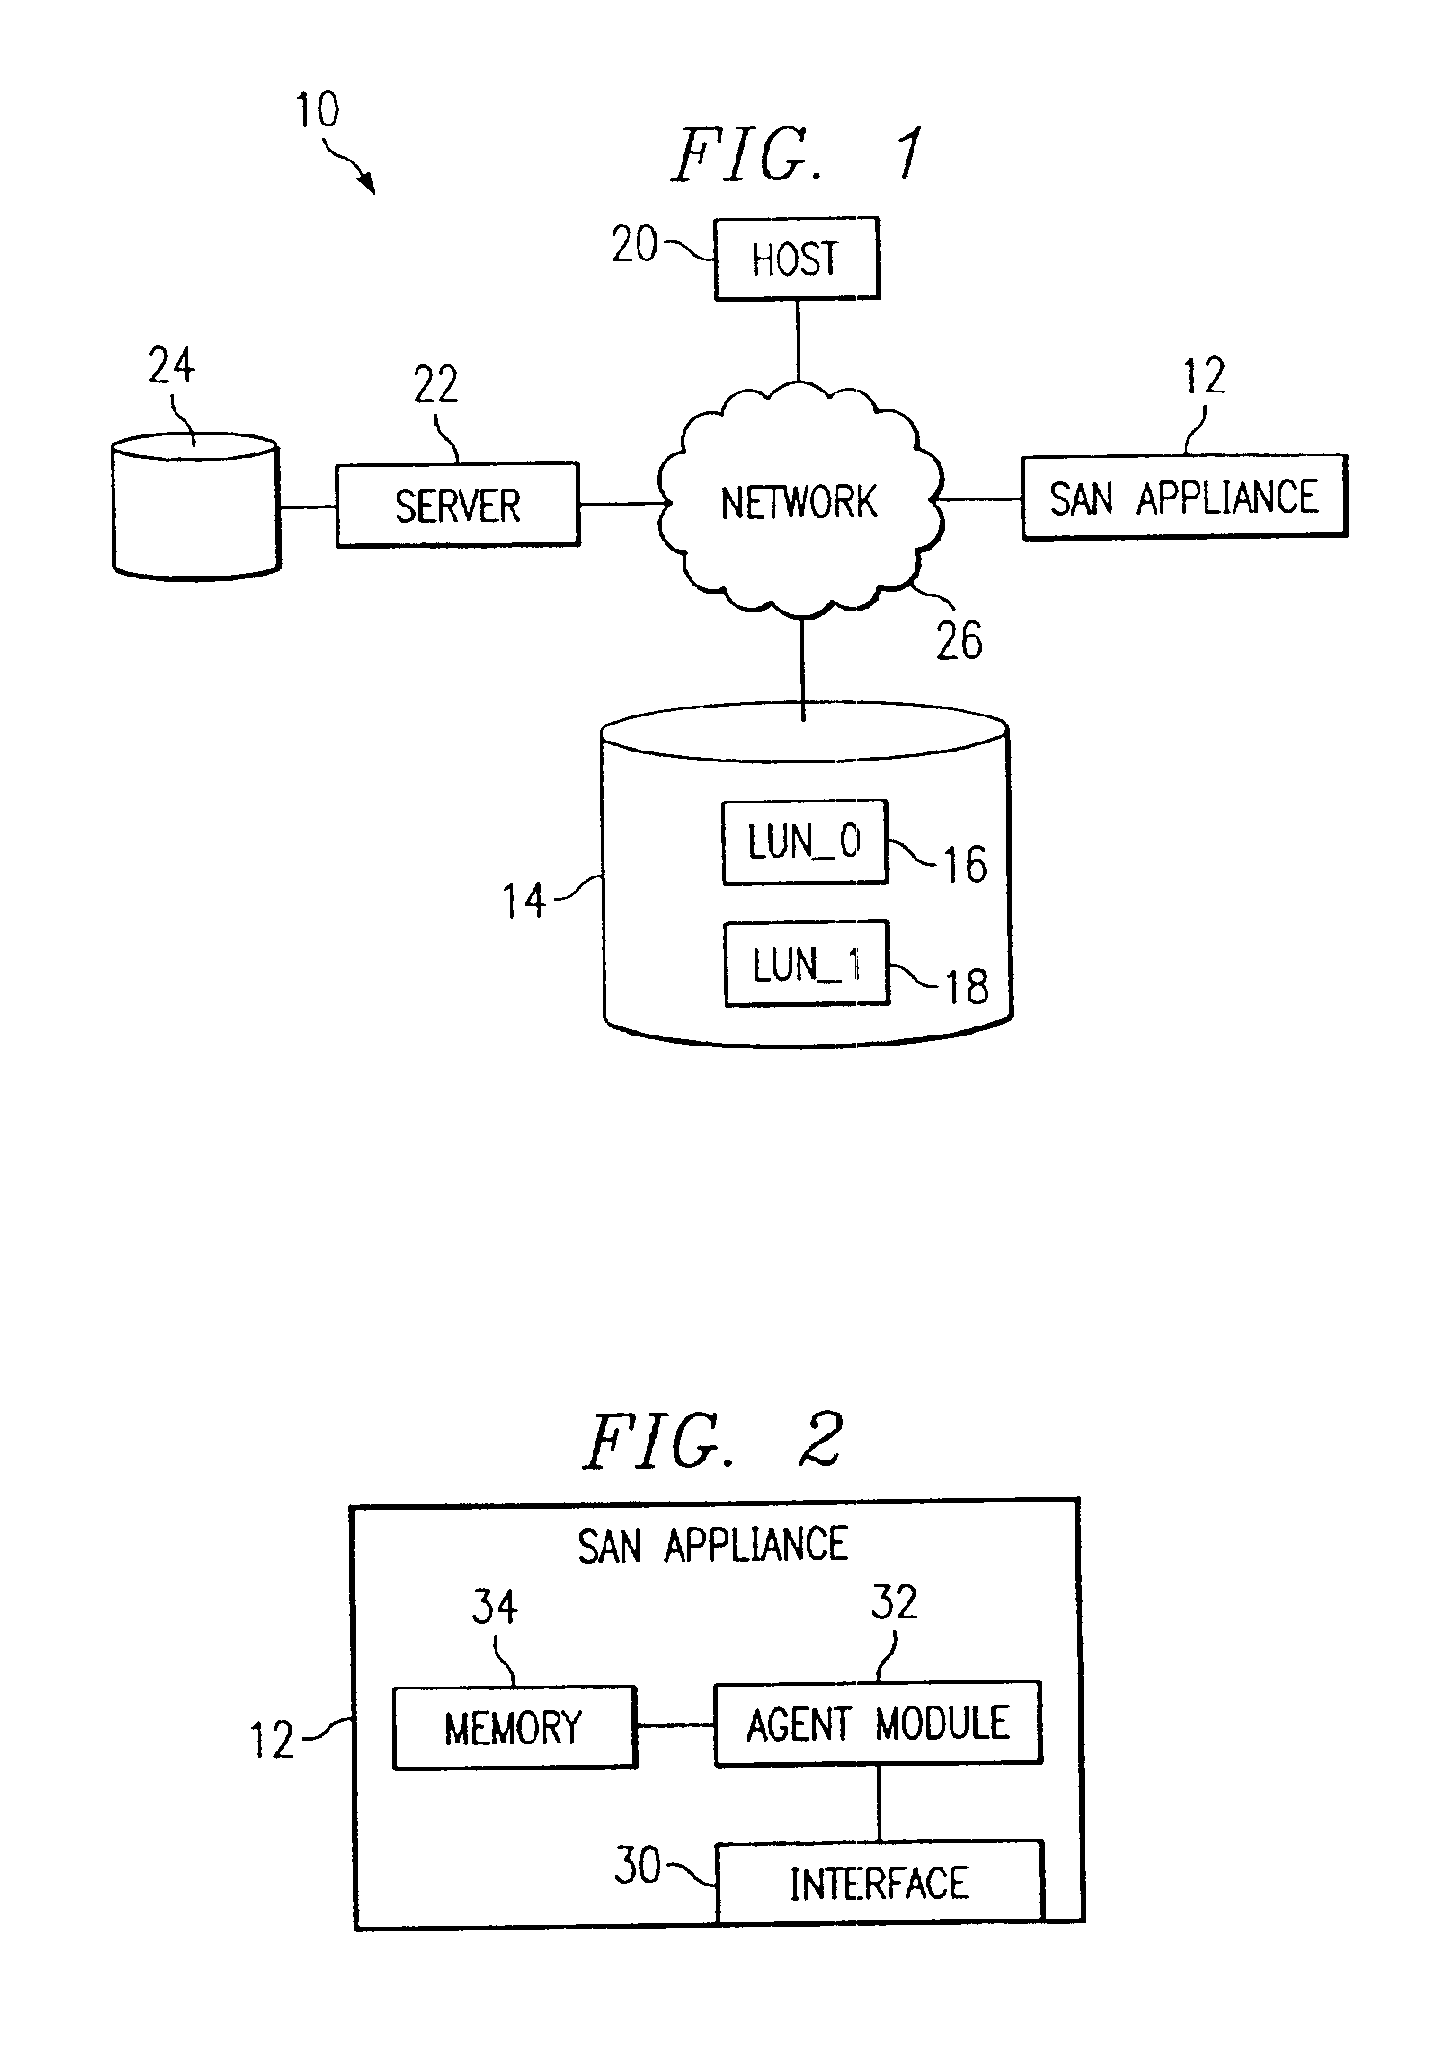 System and method for providing automatic data restoration after a storage device failure